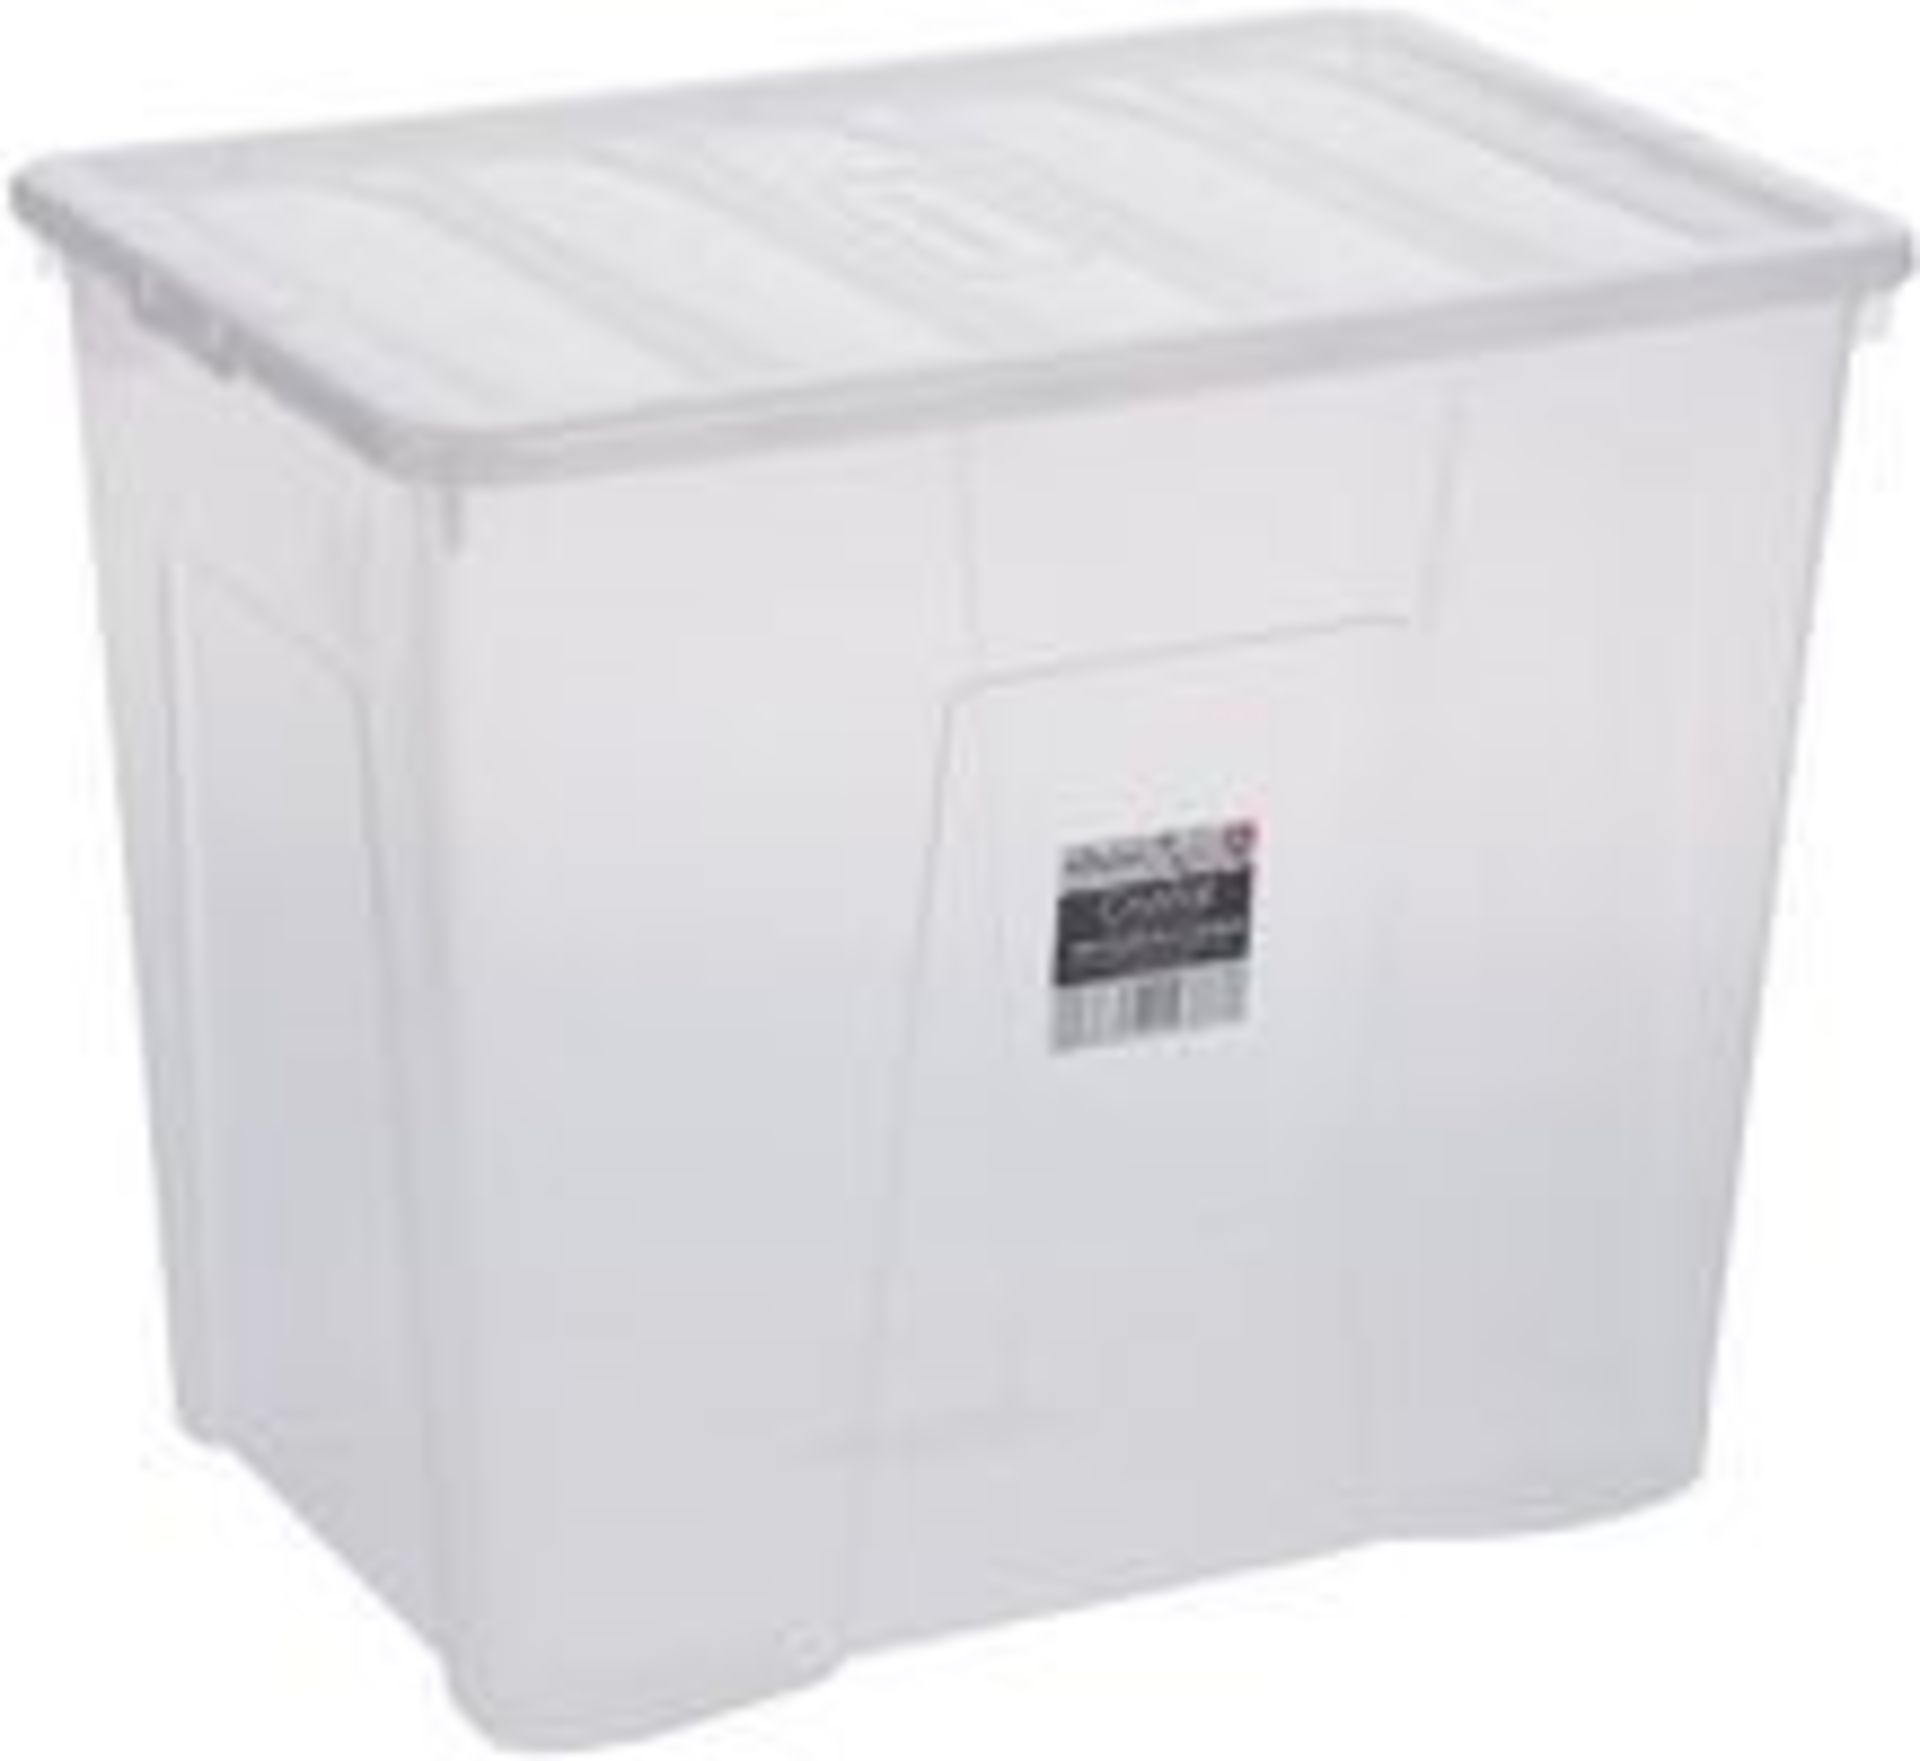 1 WHAM CLEAR PLASTIC 160L STORAGE CONTAINER WITH LID, LID CRACKED / RRP £22.00 (VIEWING HIGHLY